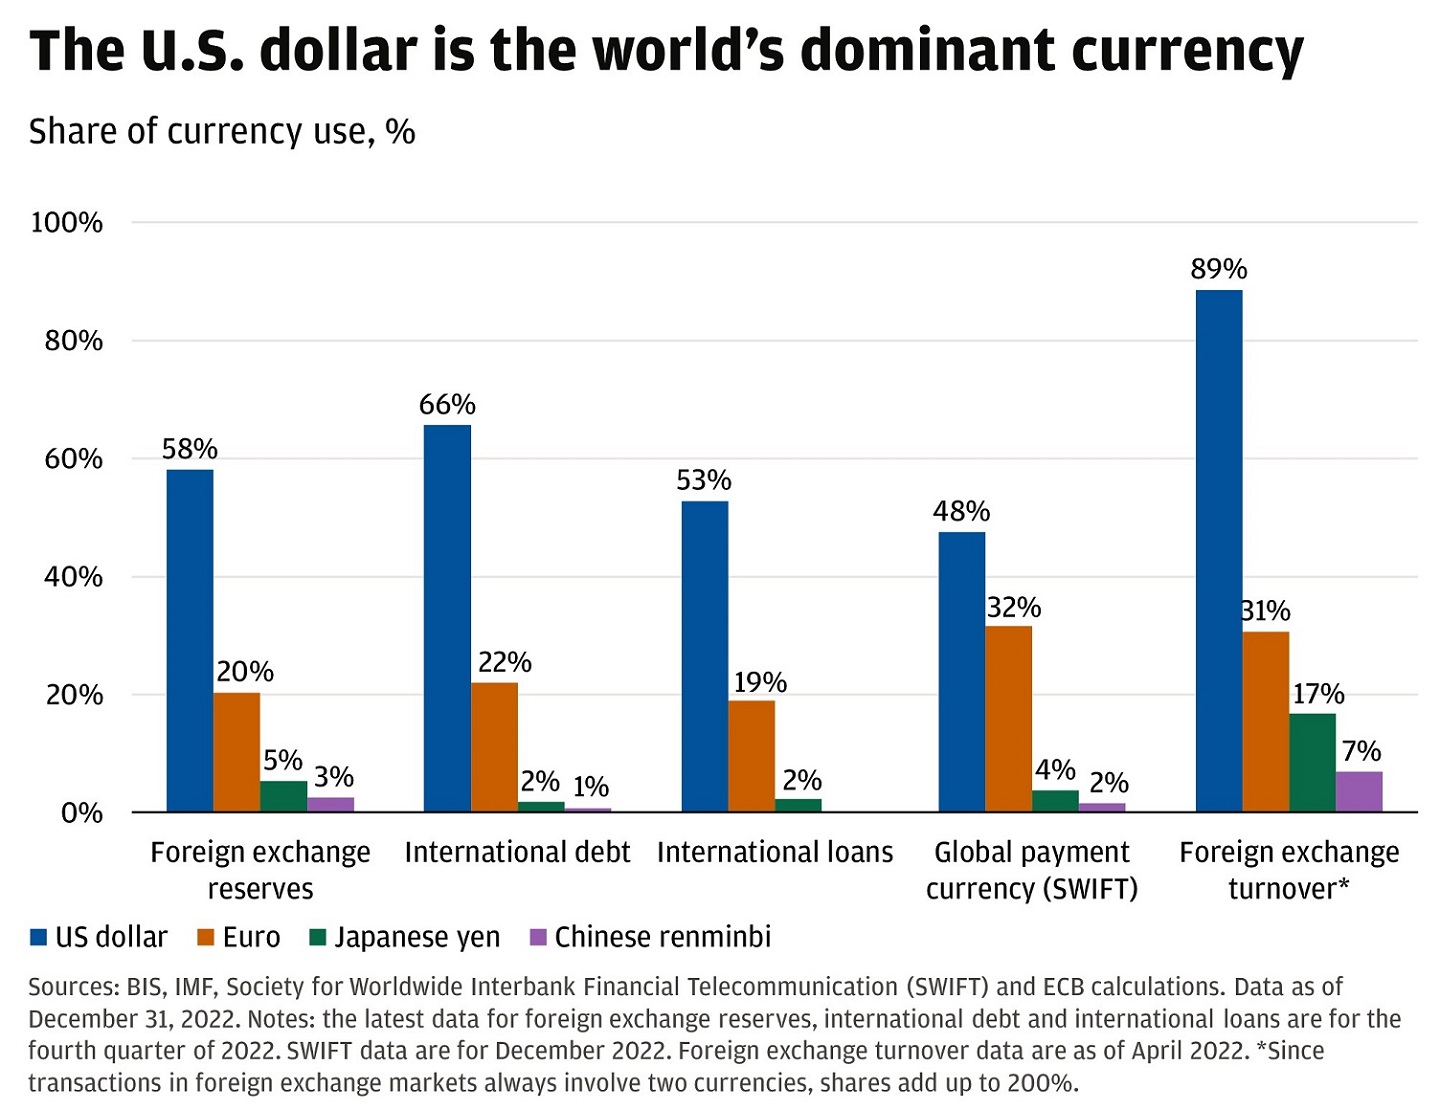 This chart shows the usage of the US dollar, the Euro, the Japanese Yen, and the Chinese renminbi across multiple areas.